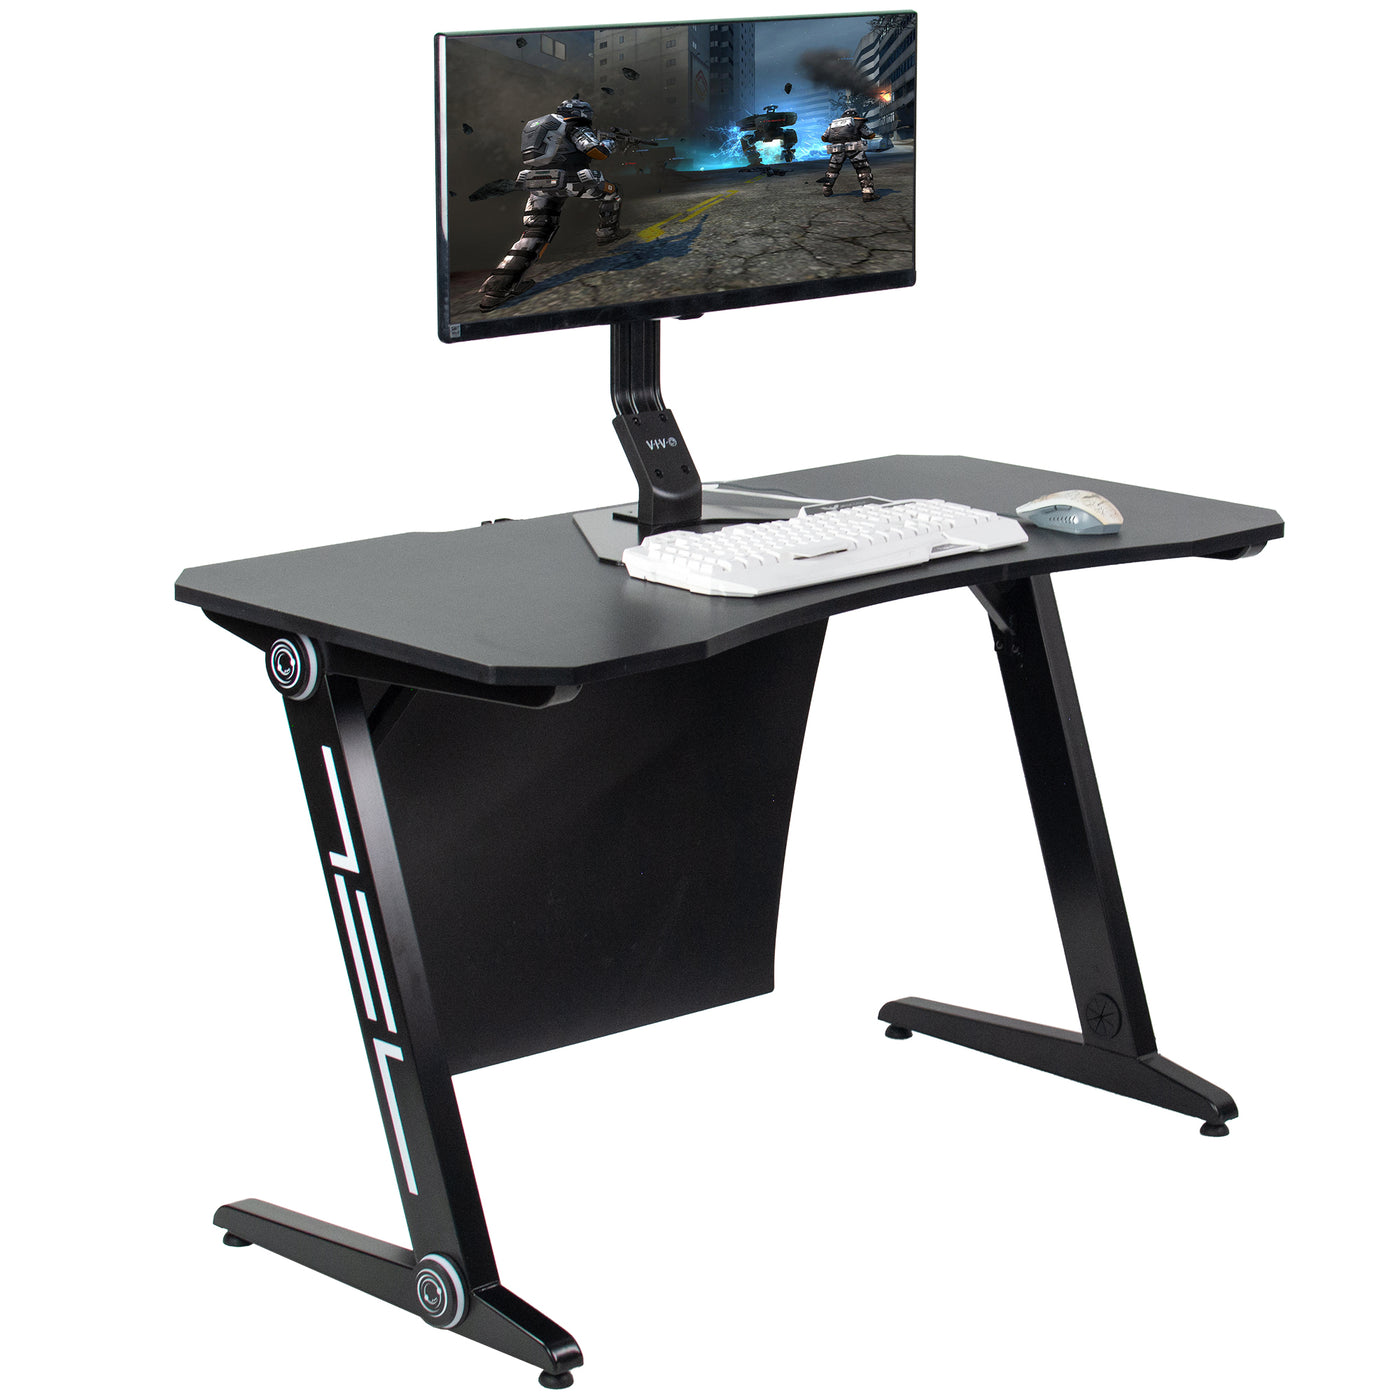 Heavy-duty z shaped gaming computer table desk.